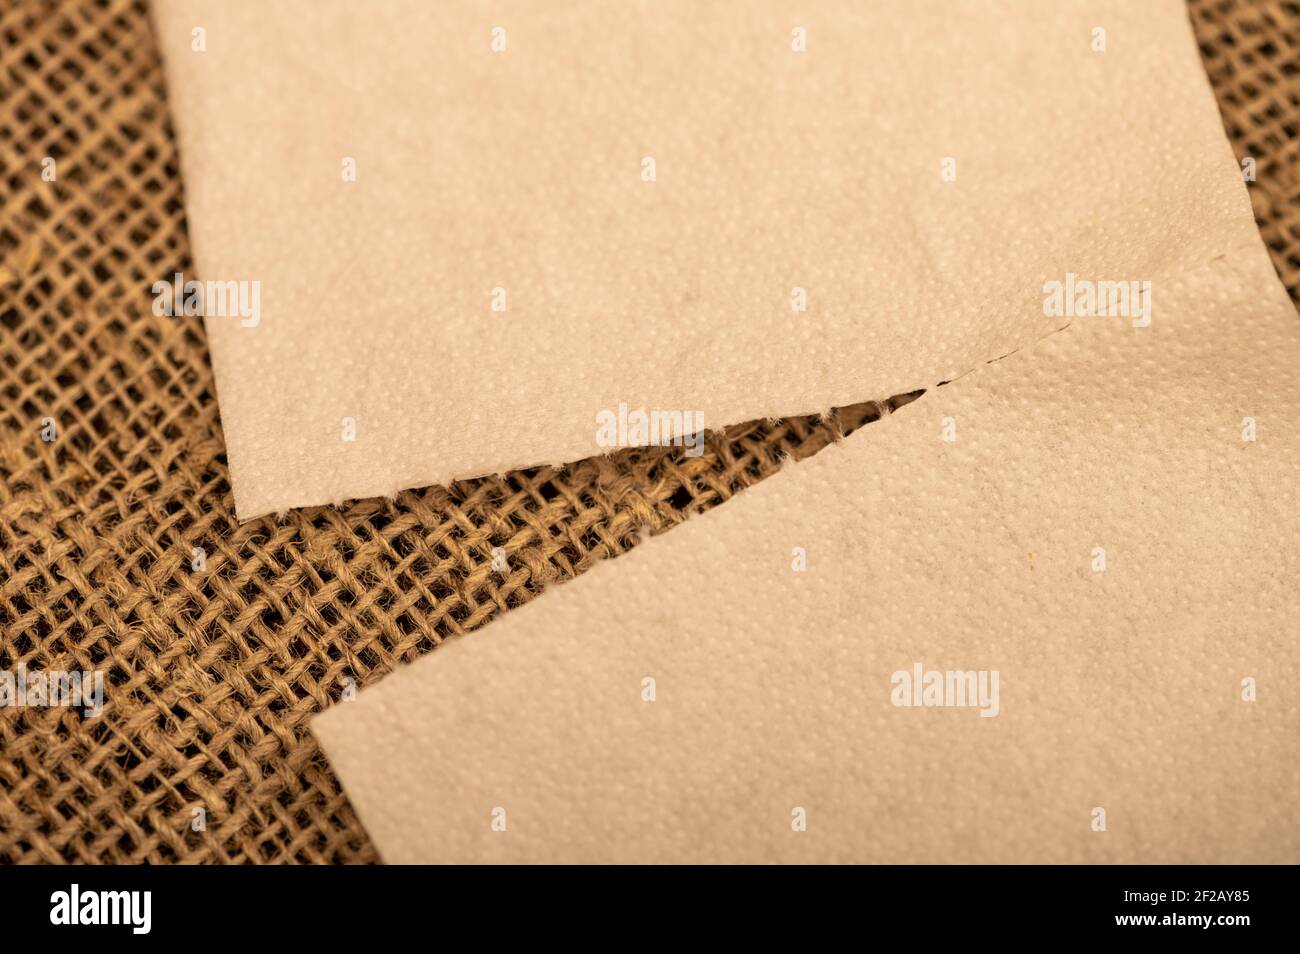 Paper napkins on a background of homespun fabric with a rough texture. Close-up, selective focus. Stock Photo